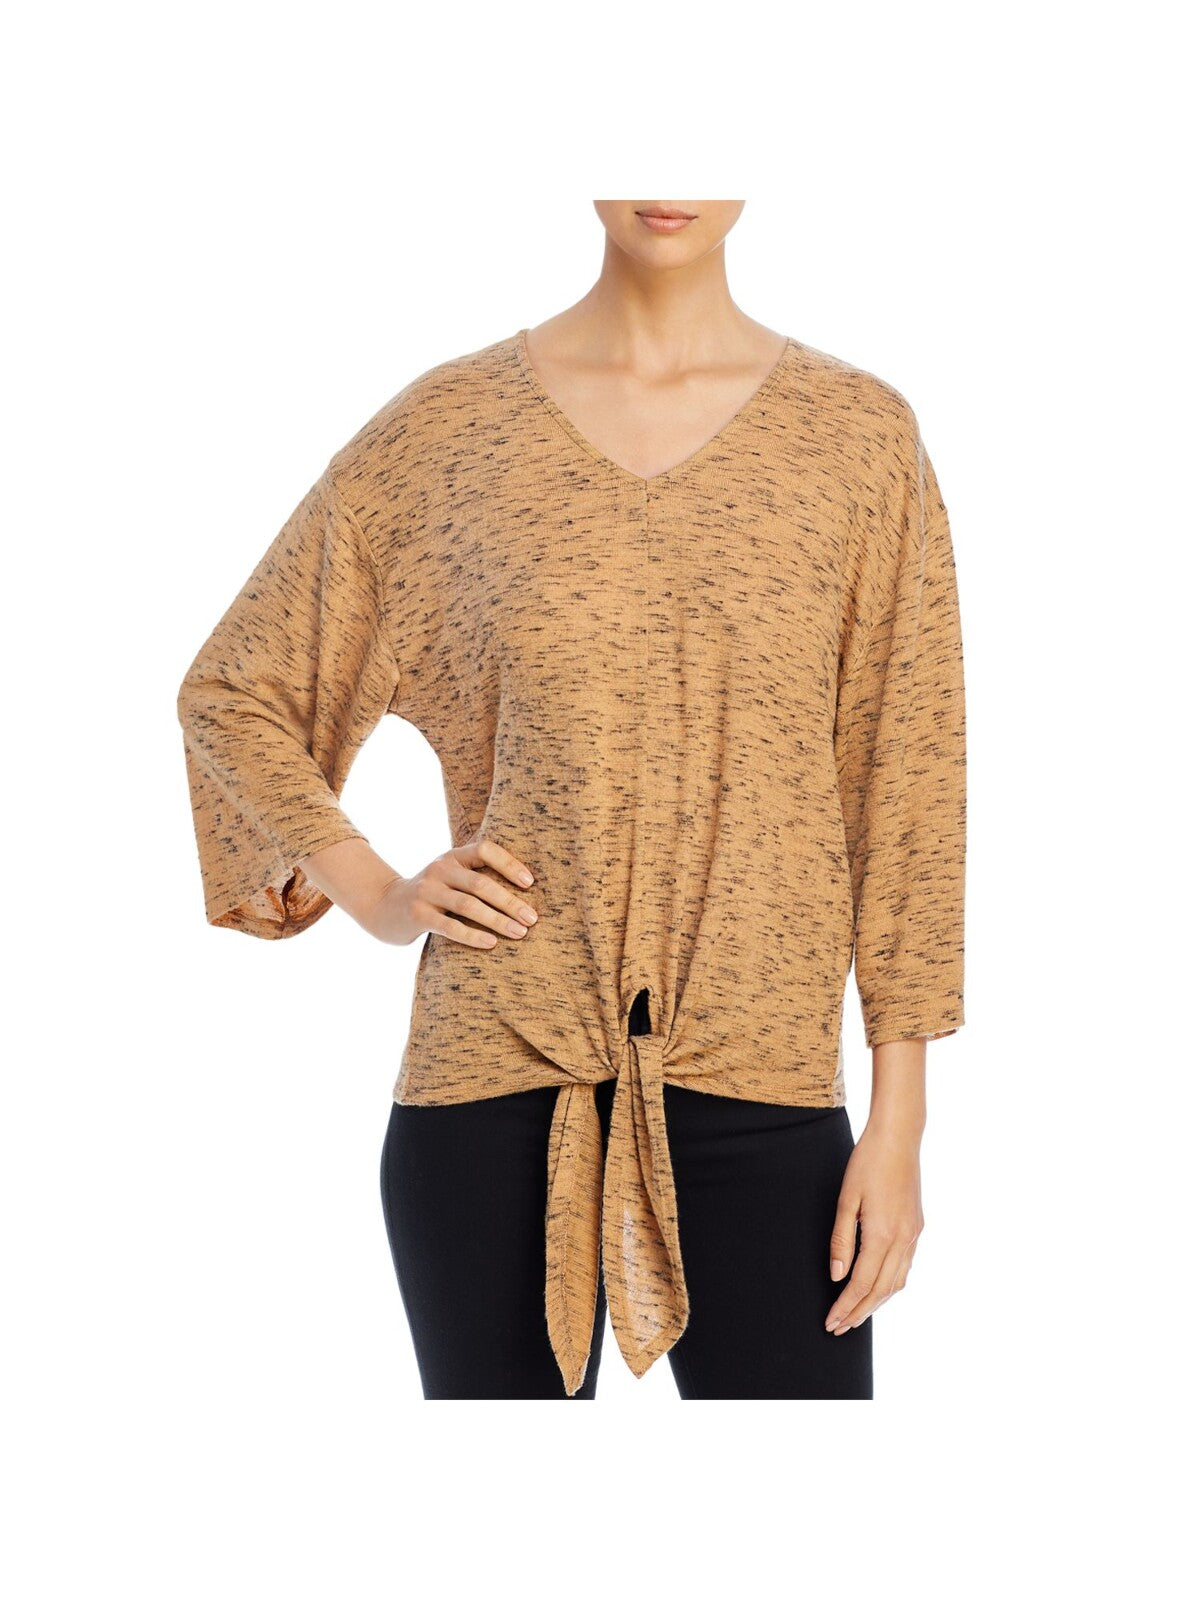 A + A COLLECTION Womens Brown Heather 3/4 Sleeve V Neck Sweater M